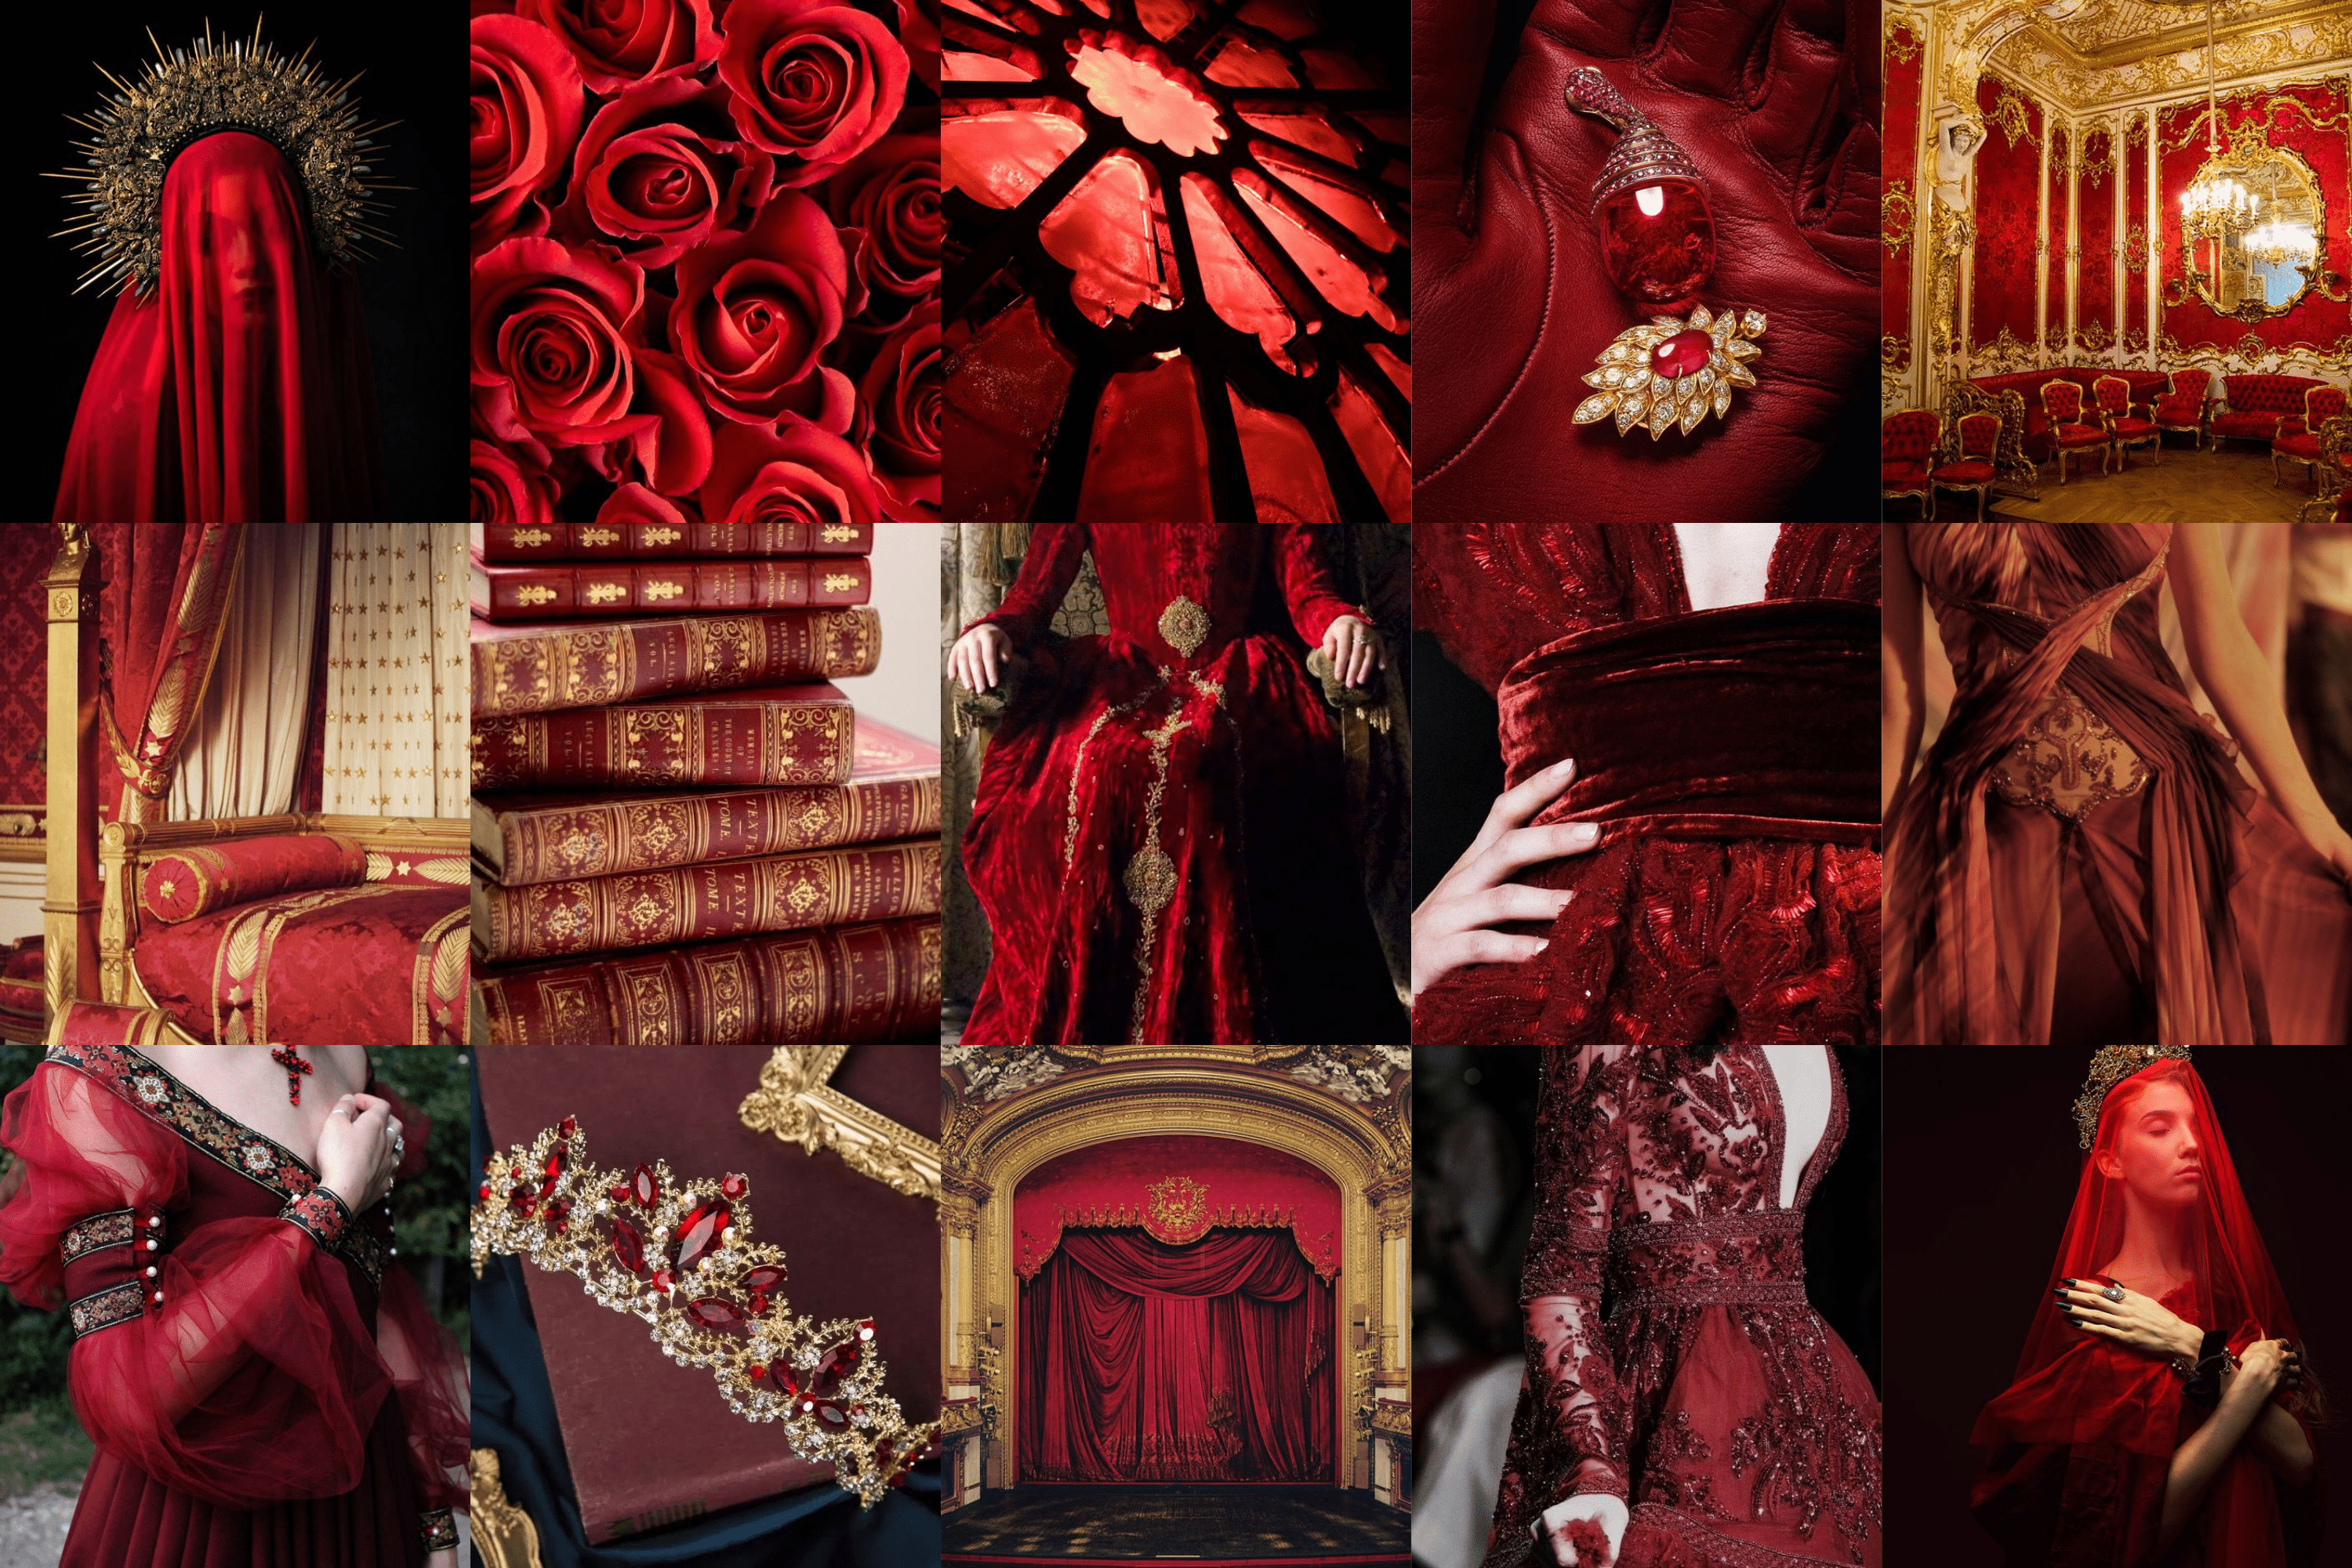 Royalcore Aesthetic Wall Collage Kit Red Room Decor Collage. Red room decor, Wall collage, Aesthetic room decor